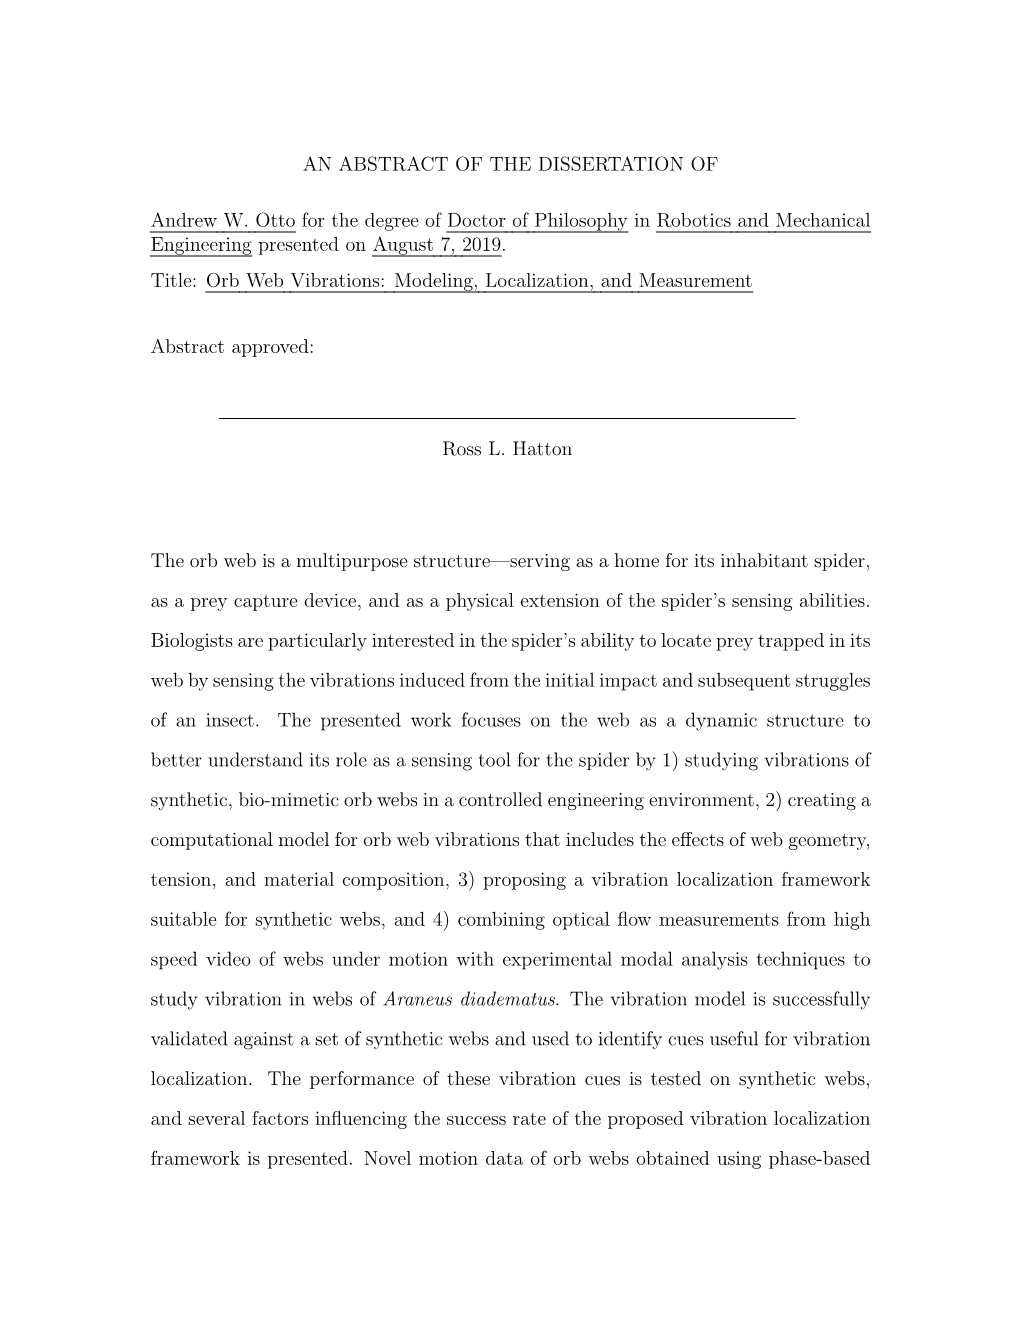 AN ABSTRACT of the DISSERTATION of Andrew W. Otto